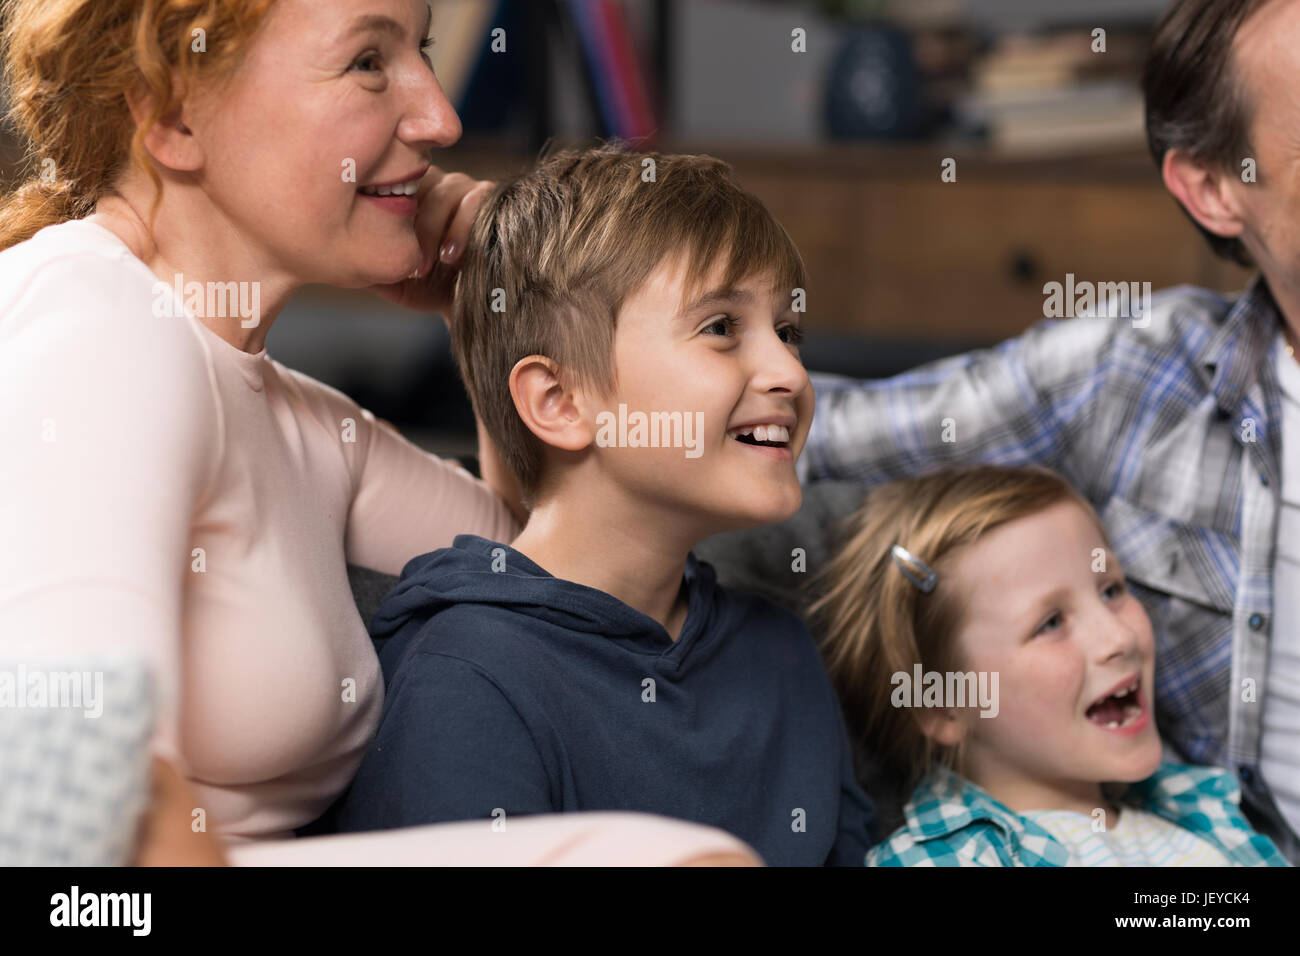 Closeup Of Happy Smiling Family Sitting On Couch Watching TV, Parents Spending Time With Children In Living Room Stock Photo